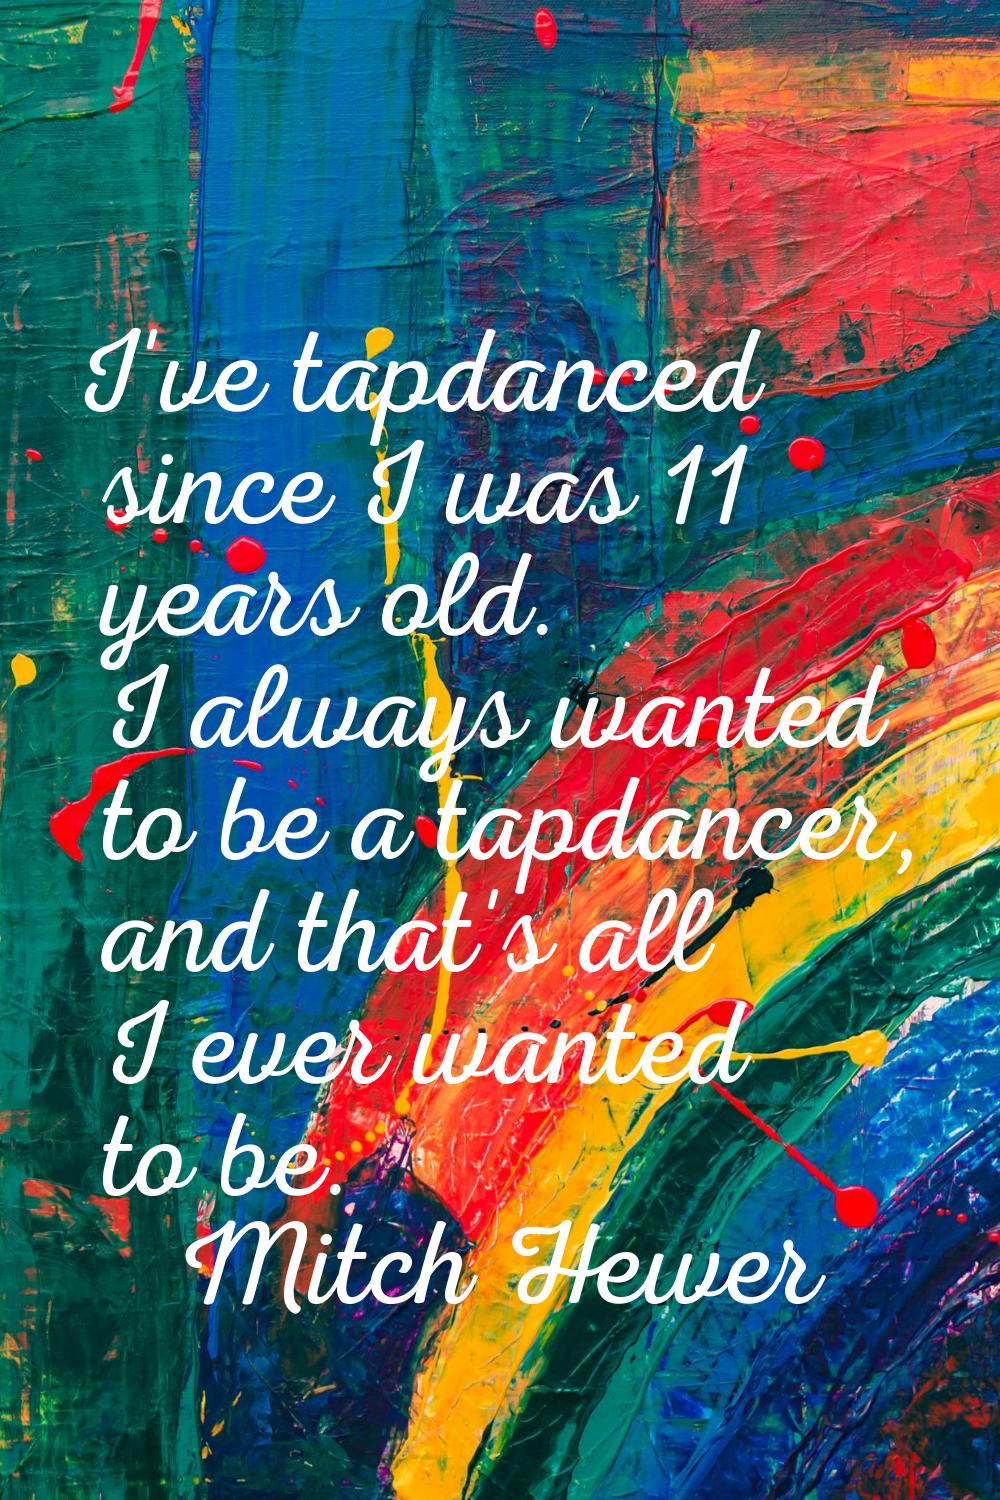 I've tapdanced since I was 11 years old. I always wanted to be a tapdancer, and that's all I ever w